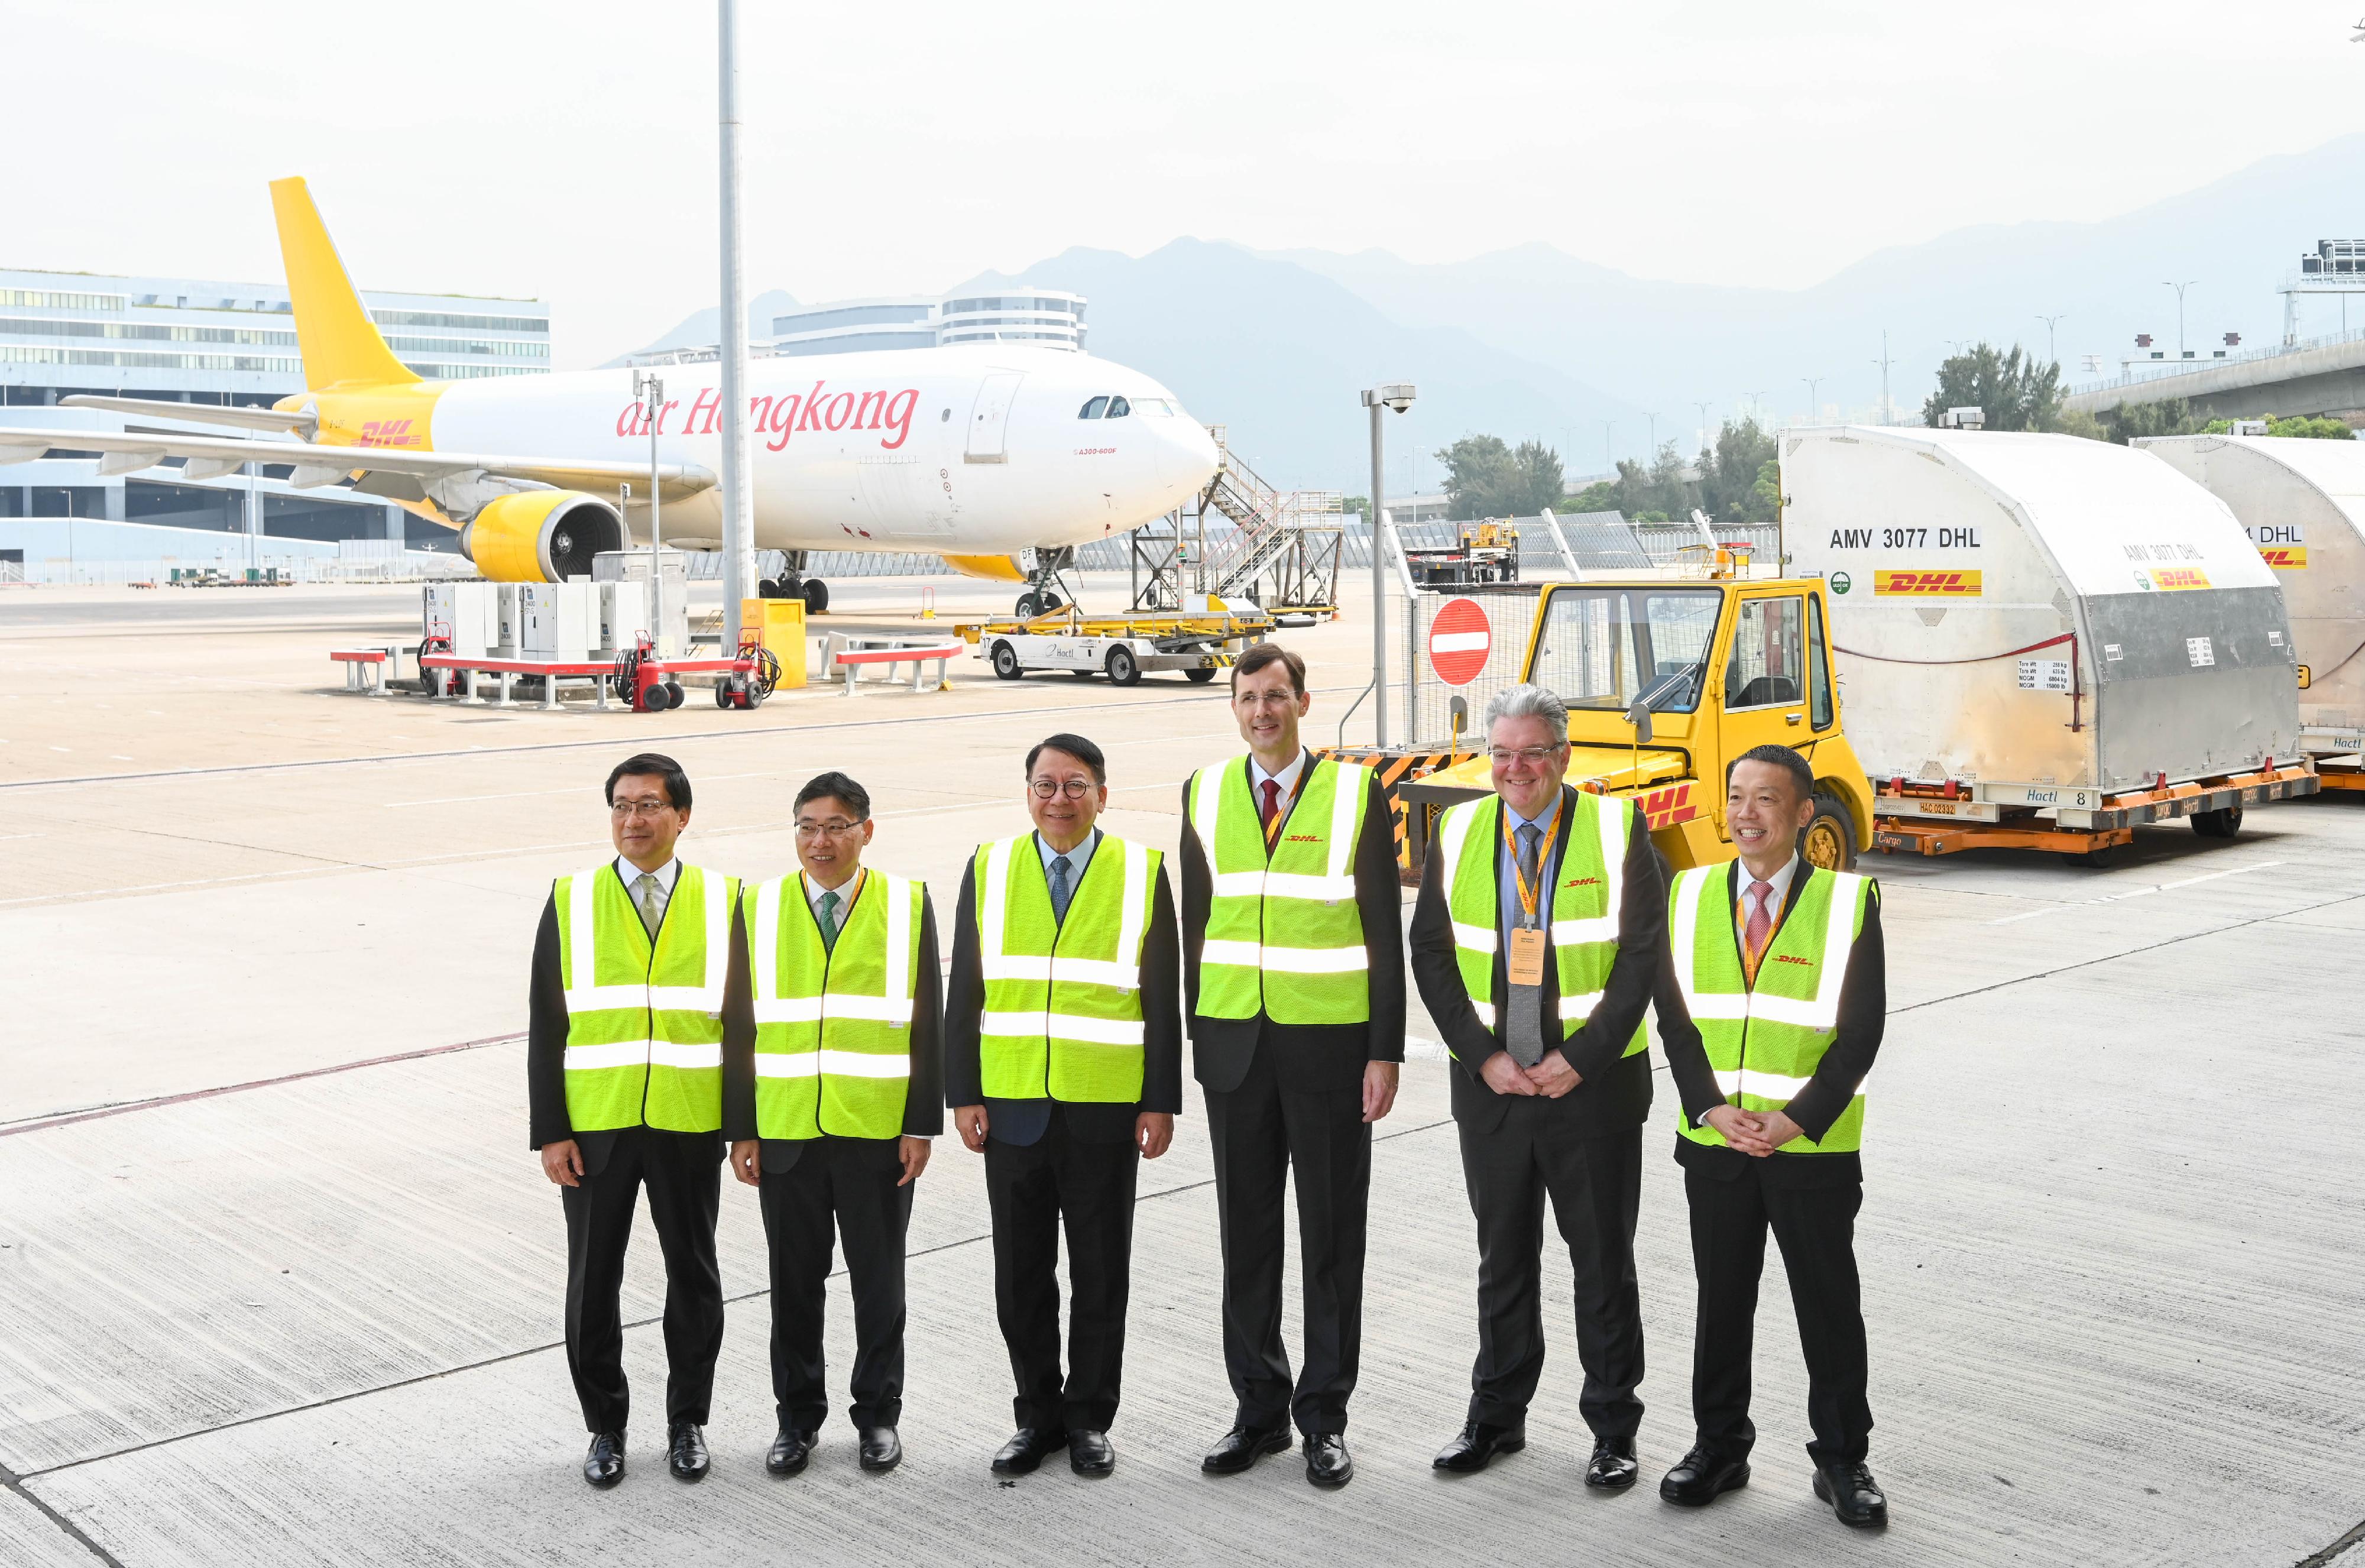 The Chief Secretary for Administration, Mr Chan Kwok-ki, attended the DHL Central Asia Hub Phase 3 Grand Opening today (November 14). Photo shows (from left) the Chief Executive Officer of the Airport Authority Hong Kong, Mr Fred Lam; the Secretary for Transport and Logistics, Mr Lam Sai-hung; Mr Chan; the Chief Executive Officer of the DHL Group, Dr Tobias Meyer; the Chief Executive Officer of the DHL Express, Mr John Pearson; and the Chief Executive Officer of the DHL Express Asia Pacific, Mr Ken Lee, on the airside of the expanded Central Asia Hub.